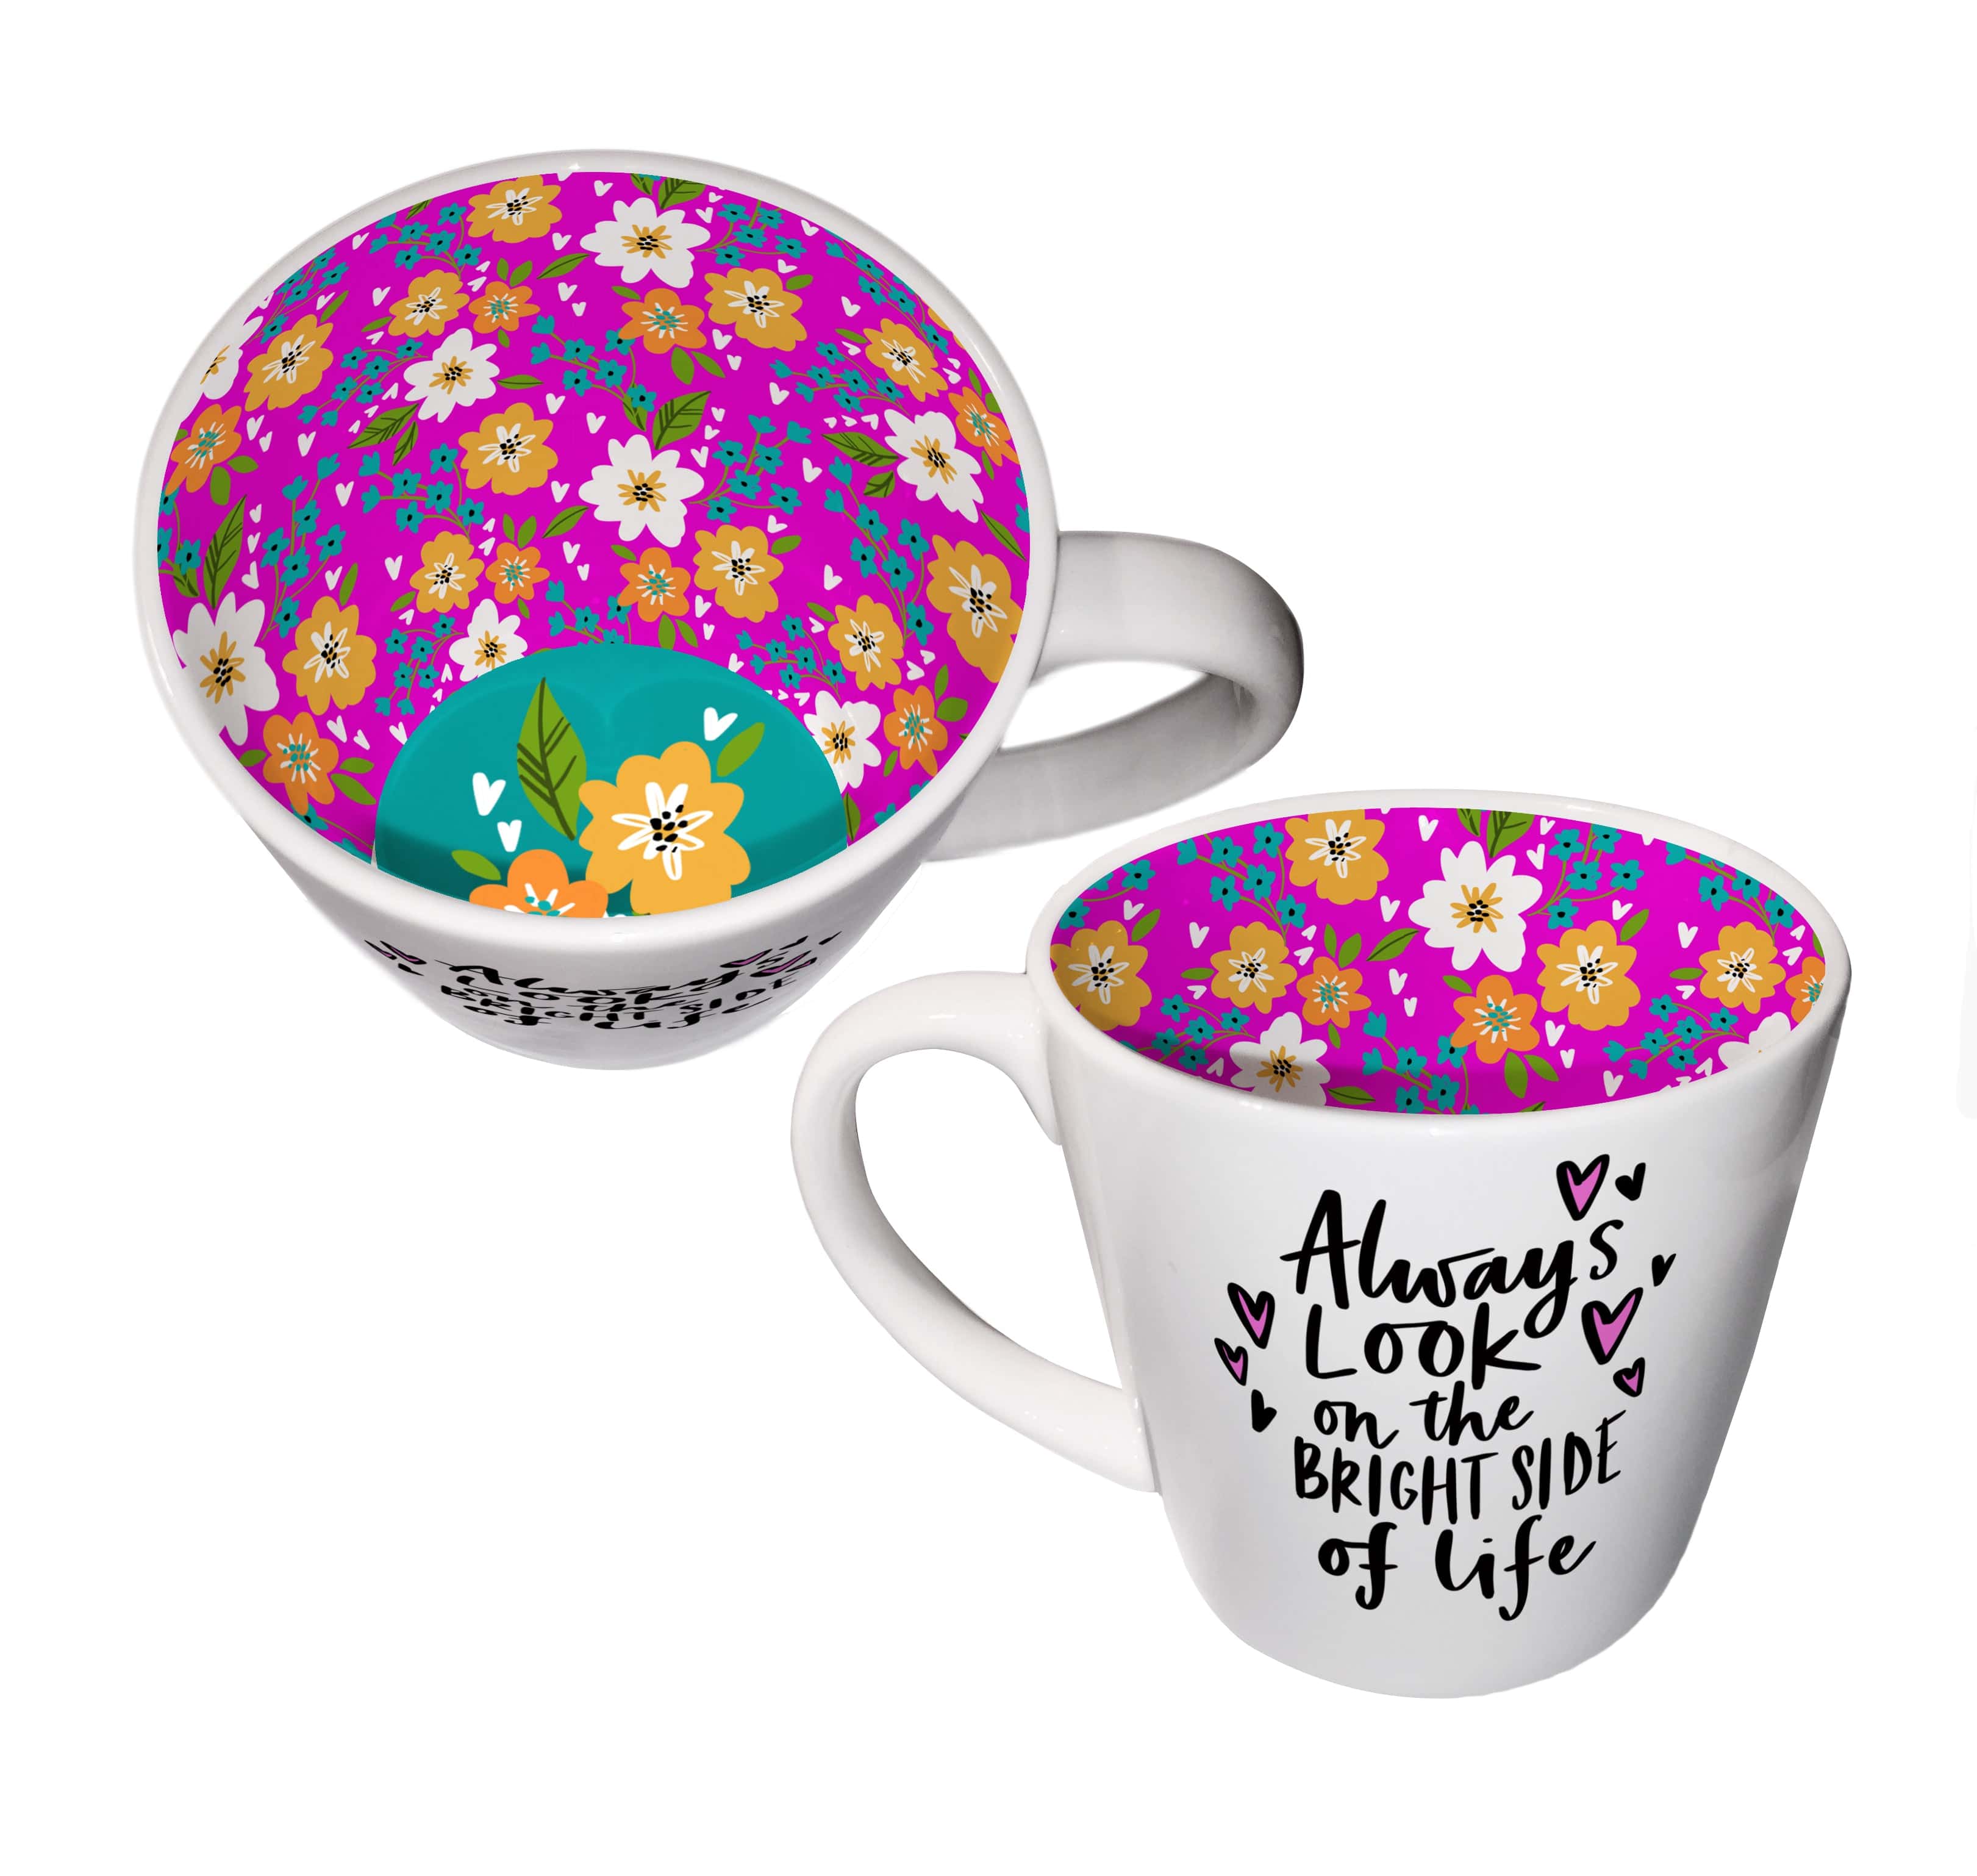 WPL Gifts Mug Inside Out Mug With Gift Box - Always Look On The Bright Side Of Life